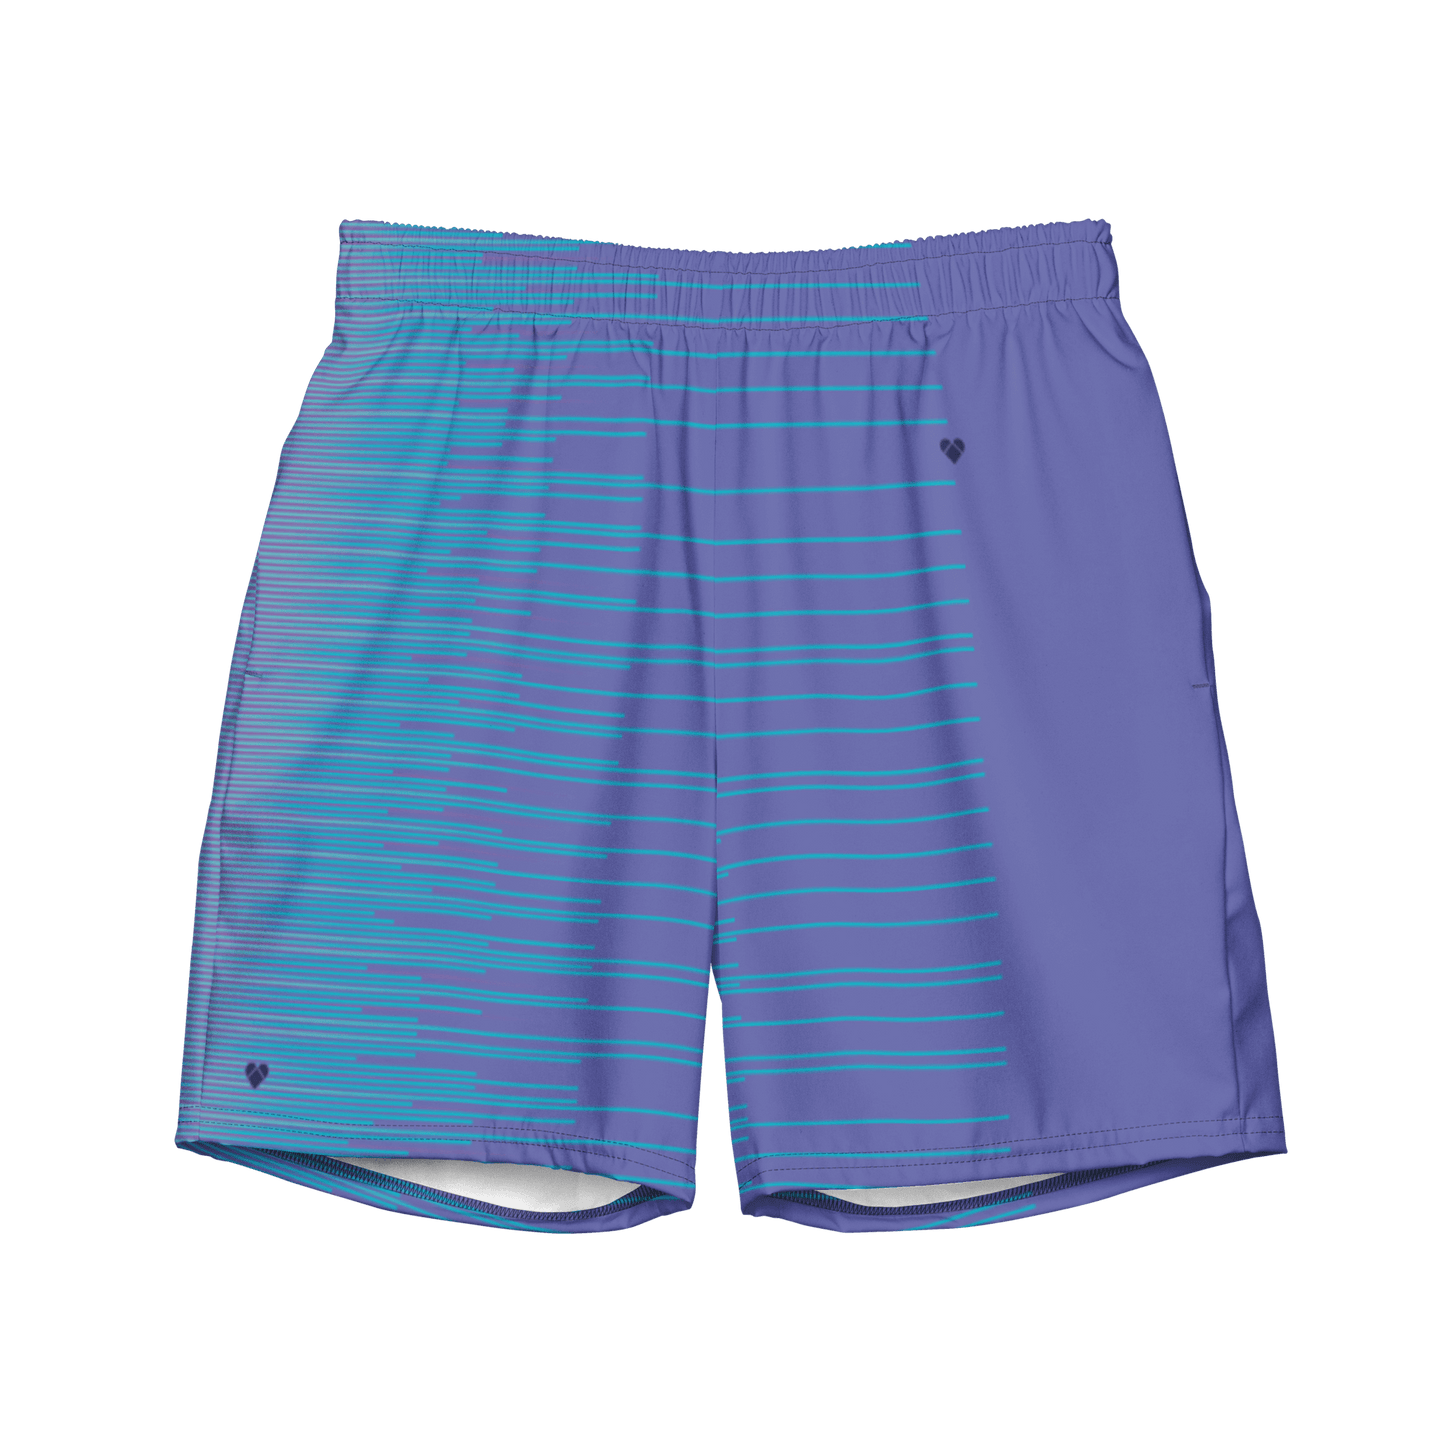 Periwinkle Stripes Dual Swim Trunks with Turquoise Gradient Stripes and Heart Logo